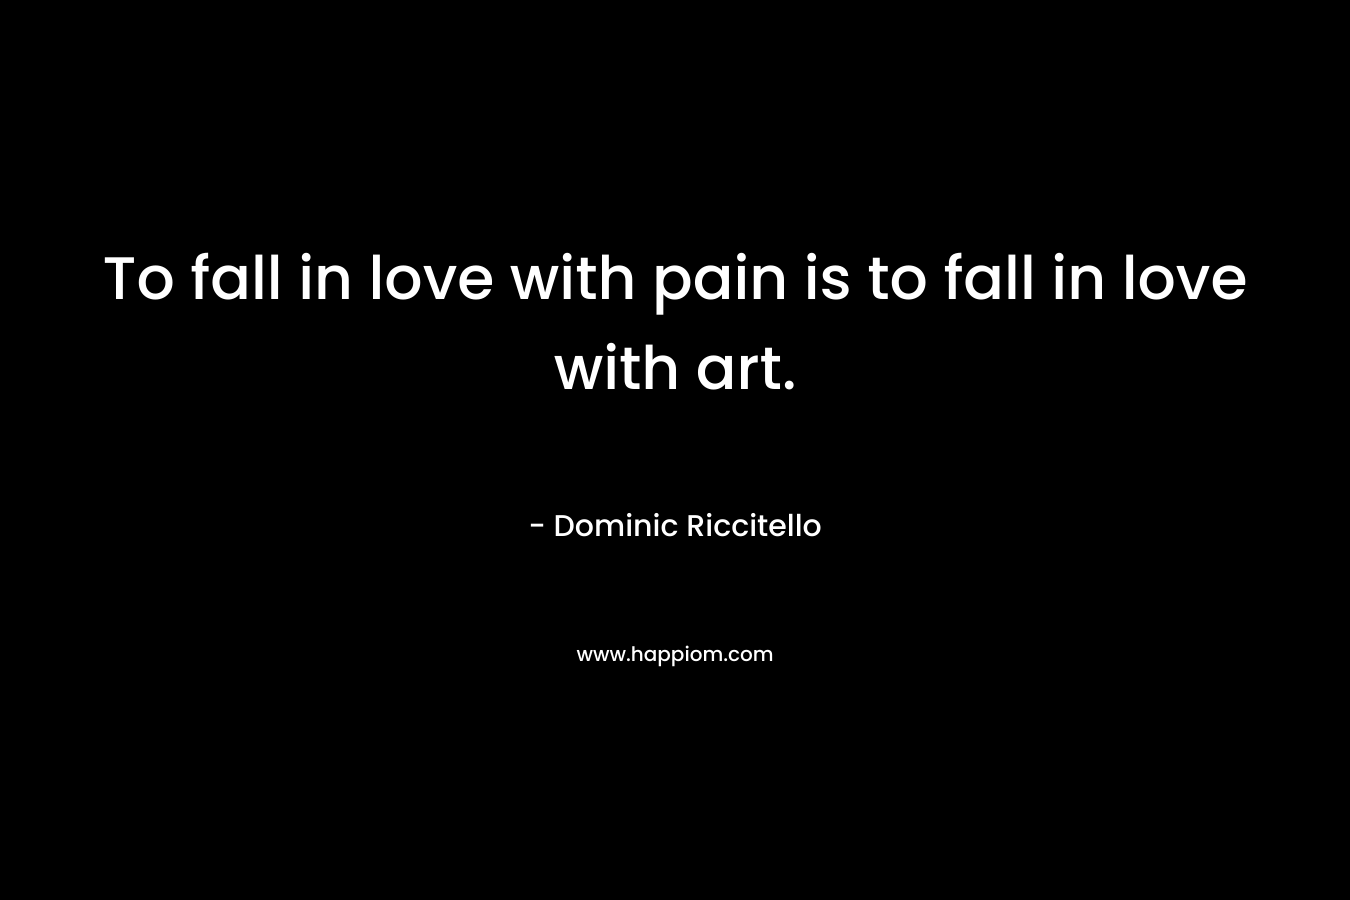 To fall in love with pain is to fall in love with art.